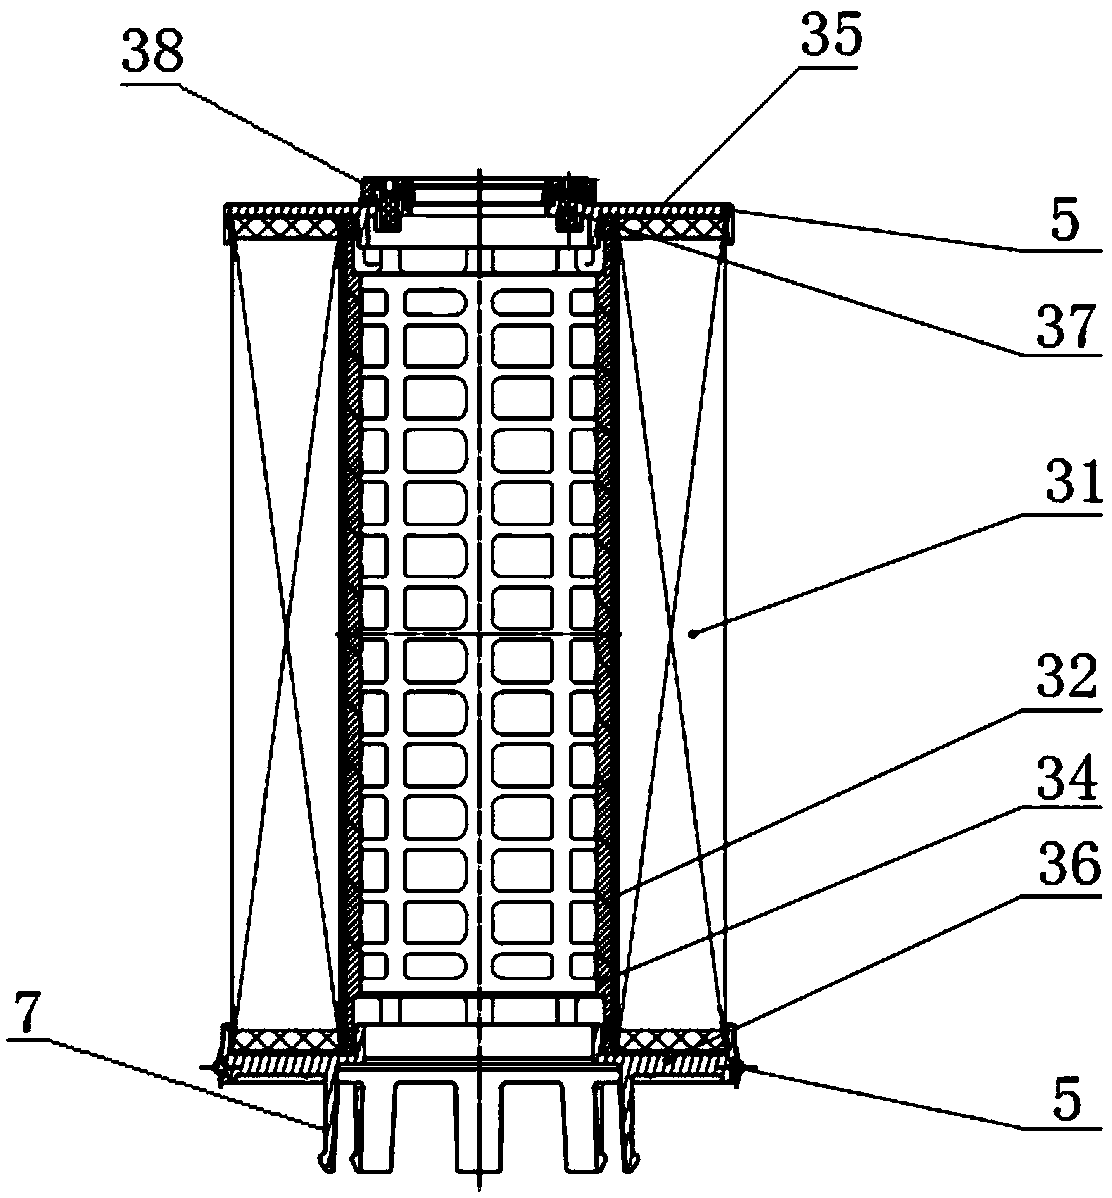 Three-stage oil-water separator